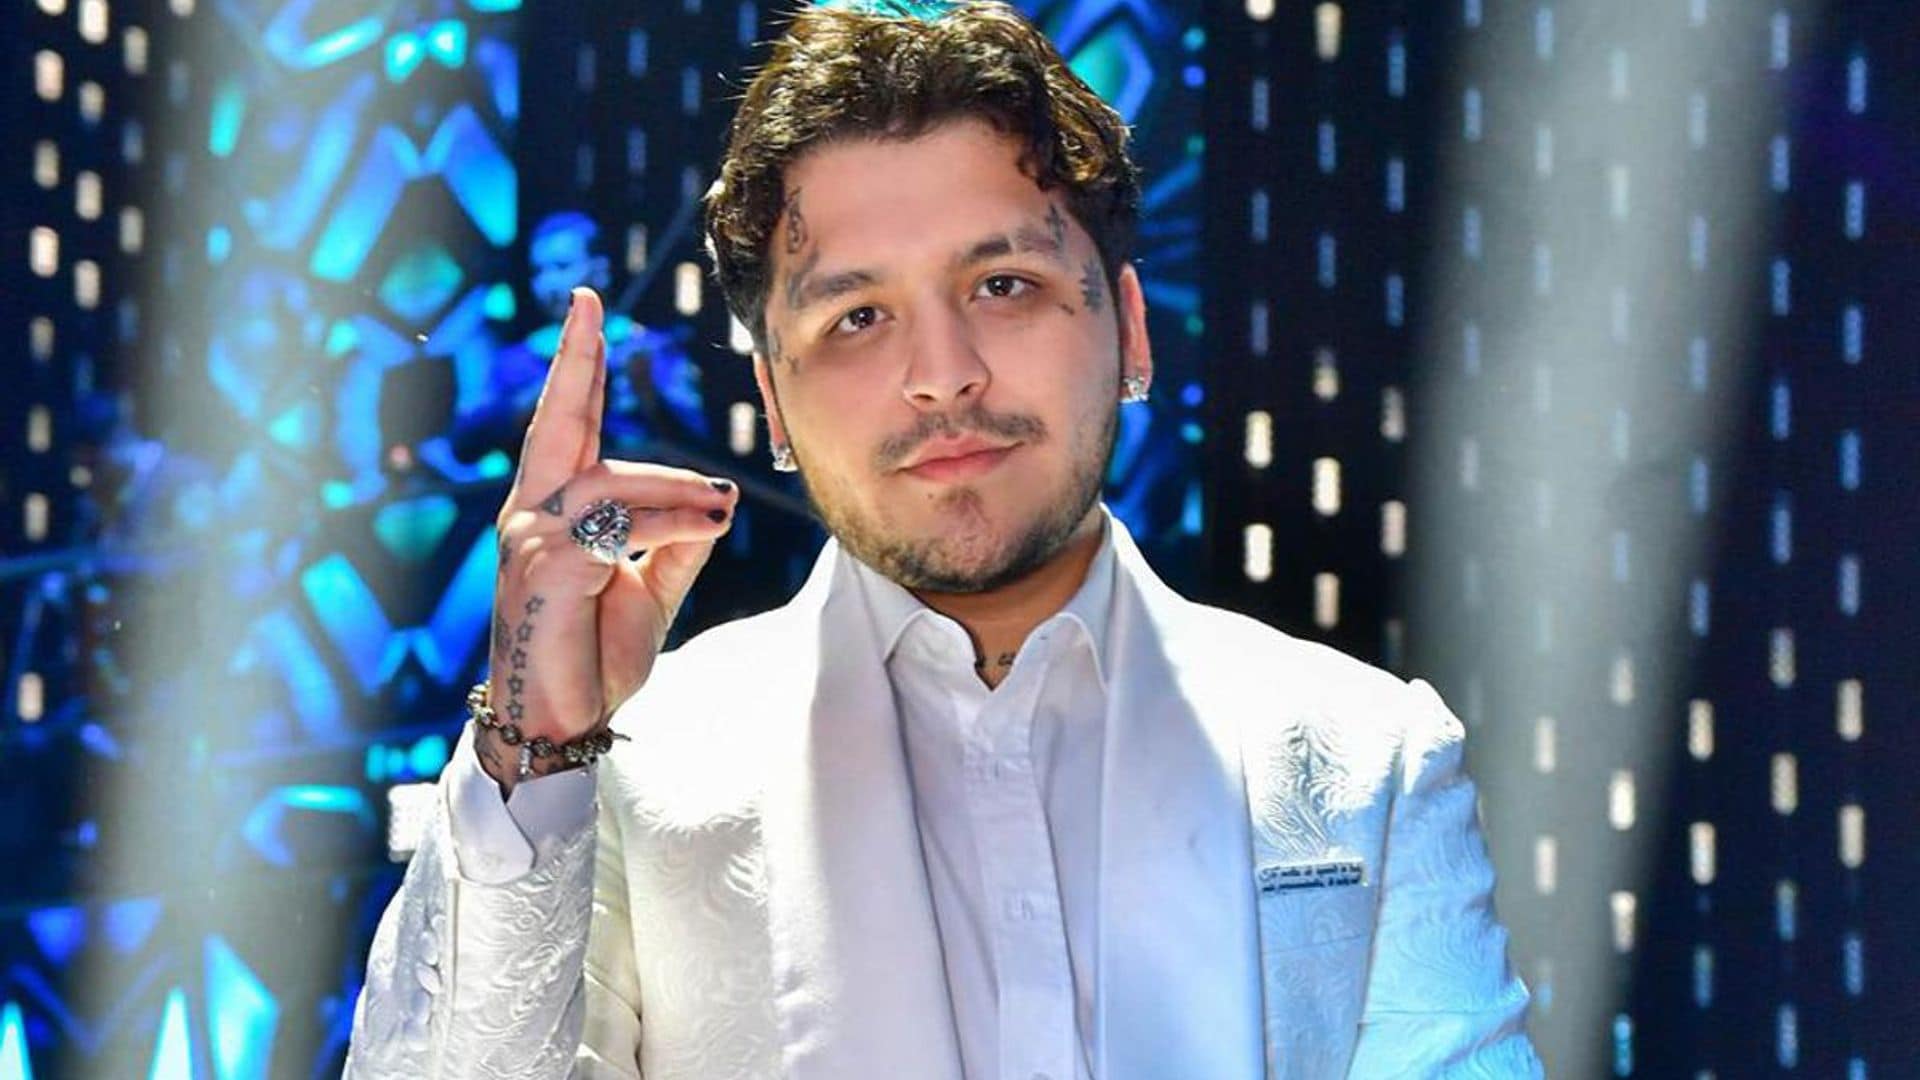 Christian Nodal reveals he used to feel insecure without luxurious clothes and expensive cars